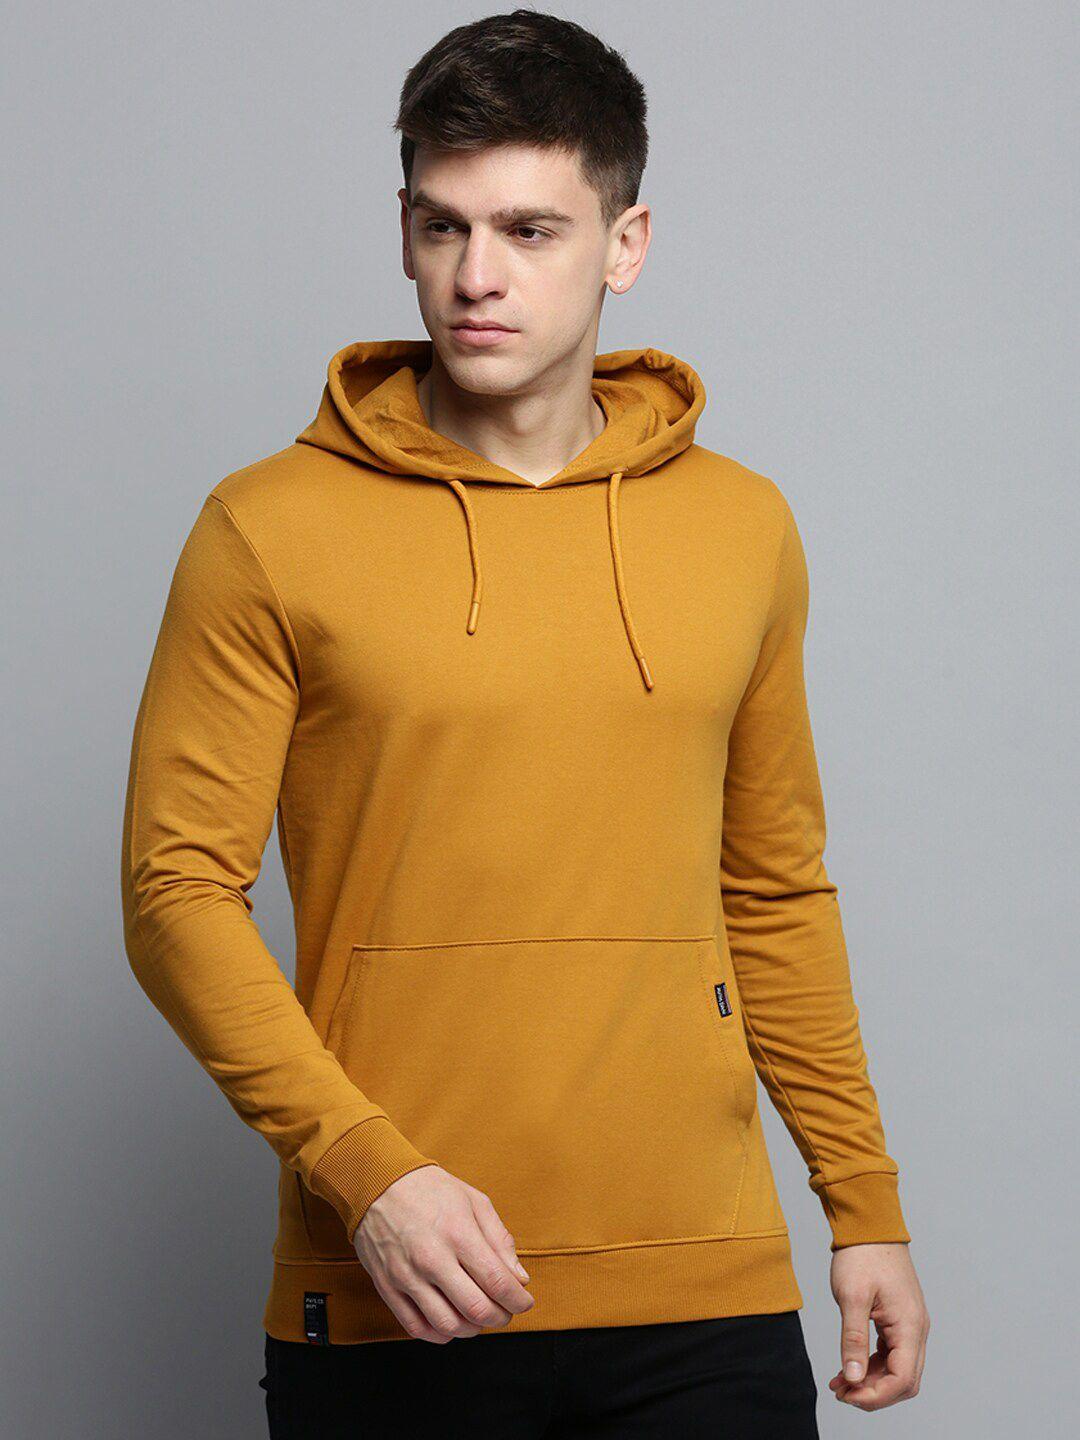 showoff-hooded-pullover-cotton-sweatshirt